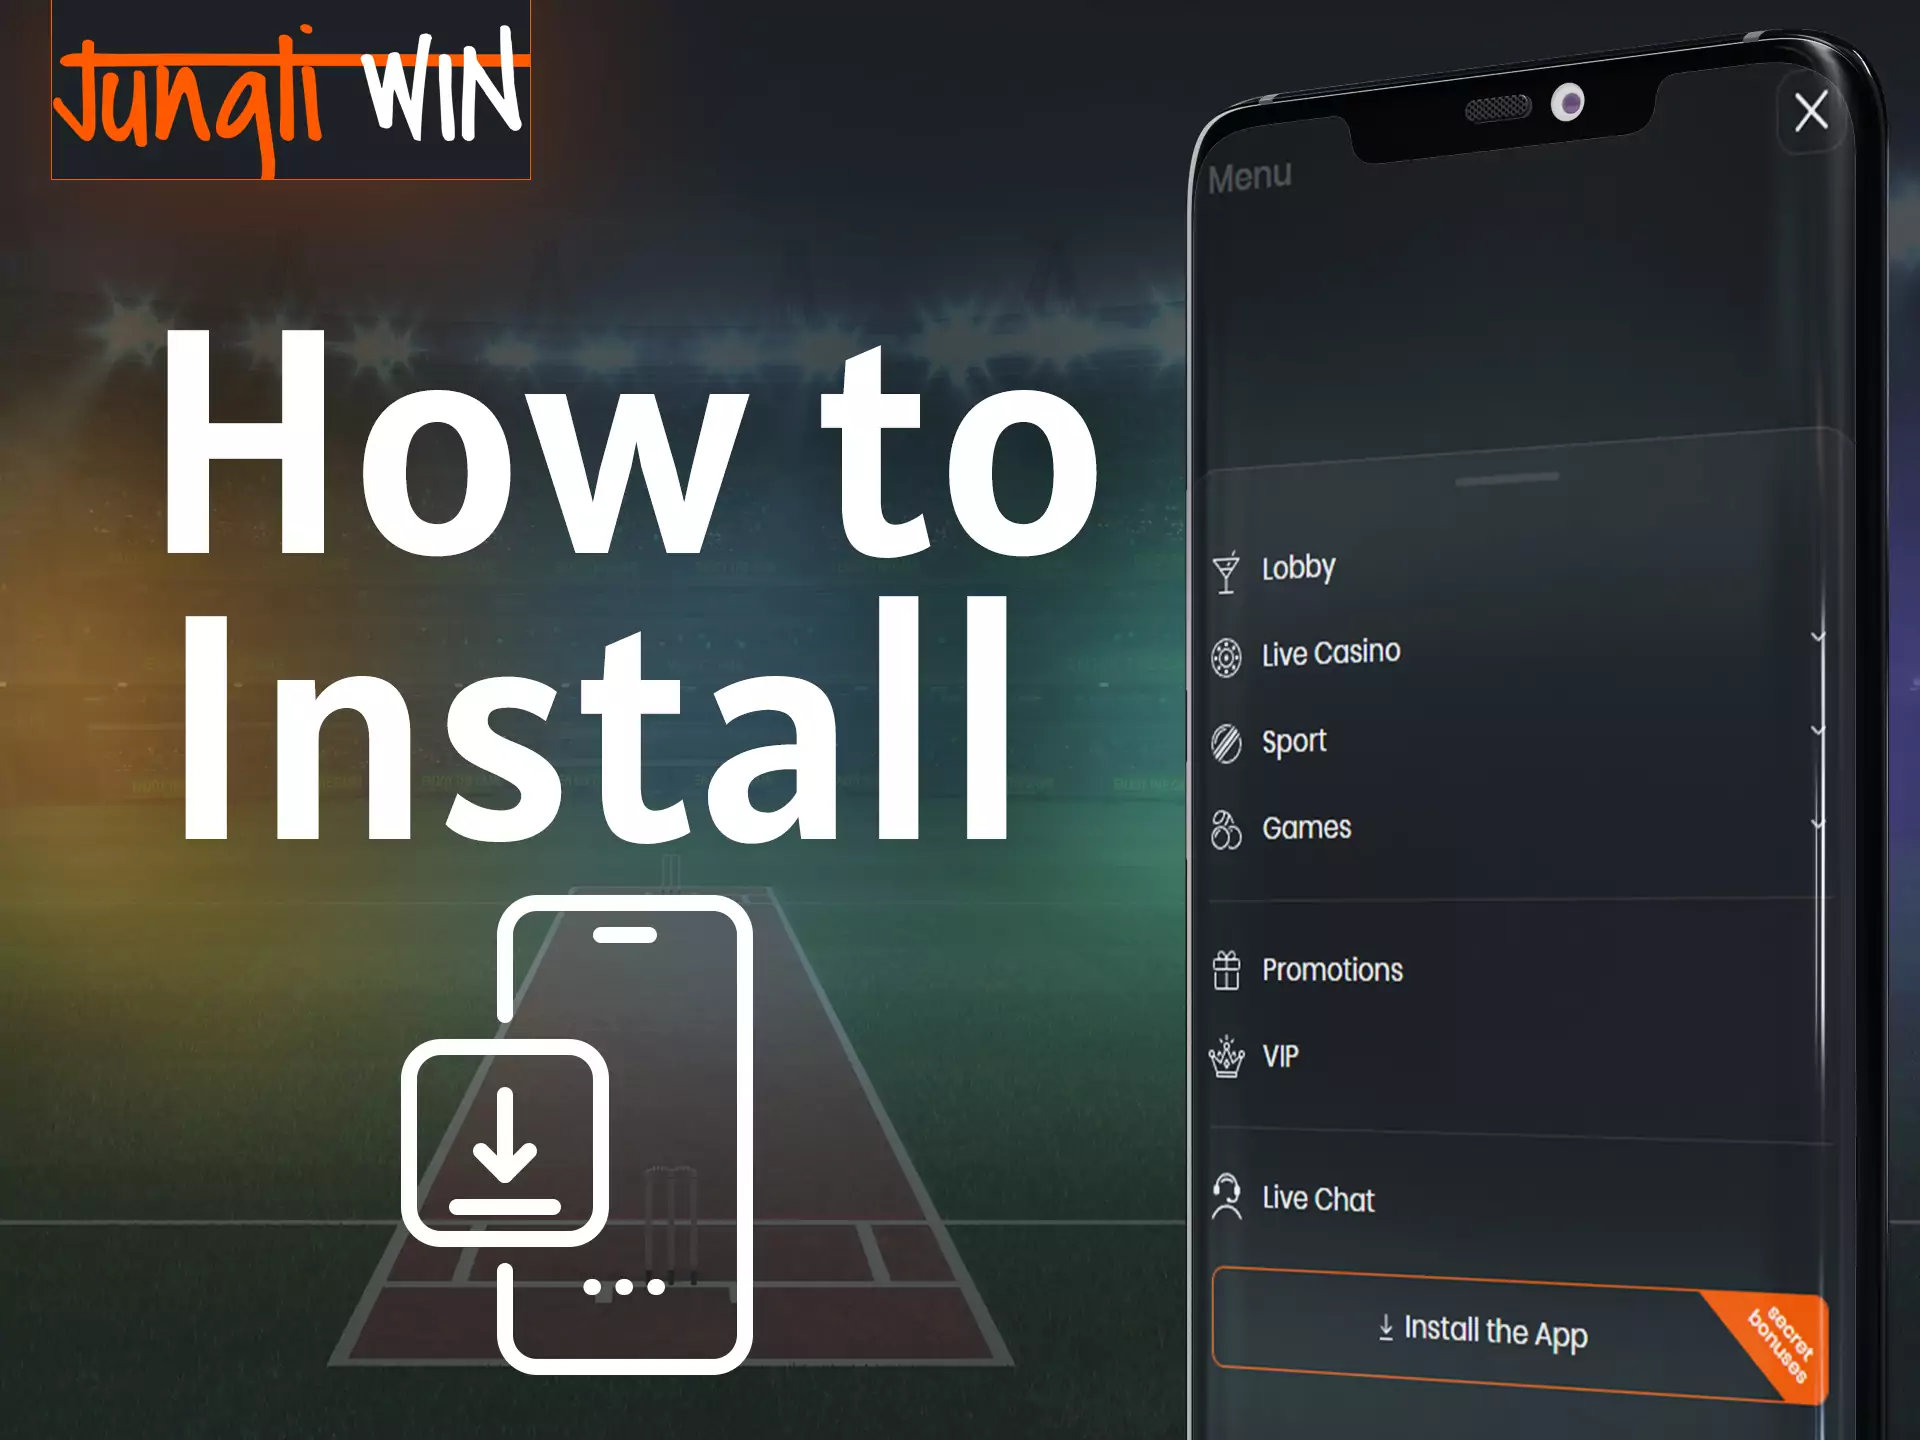 With this instruction, easily install the Jungliwin app and have fun playing.